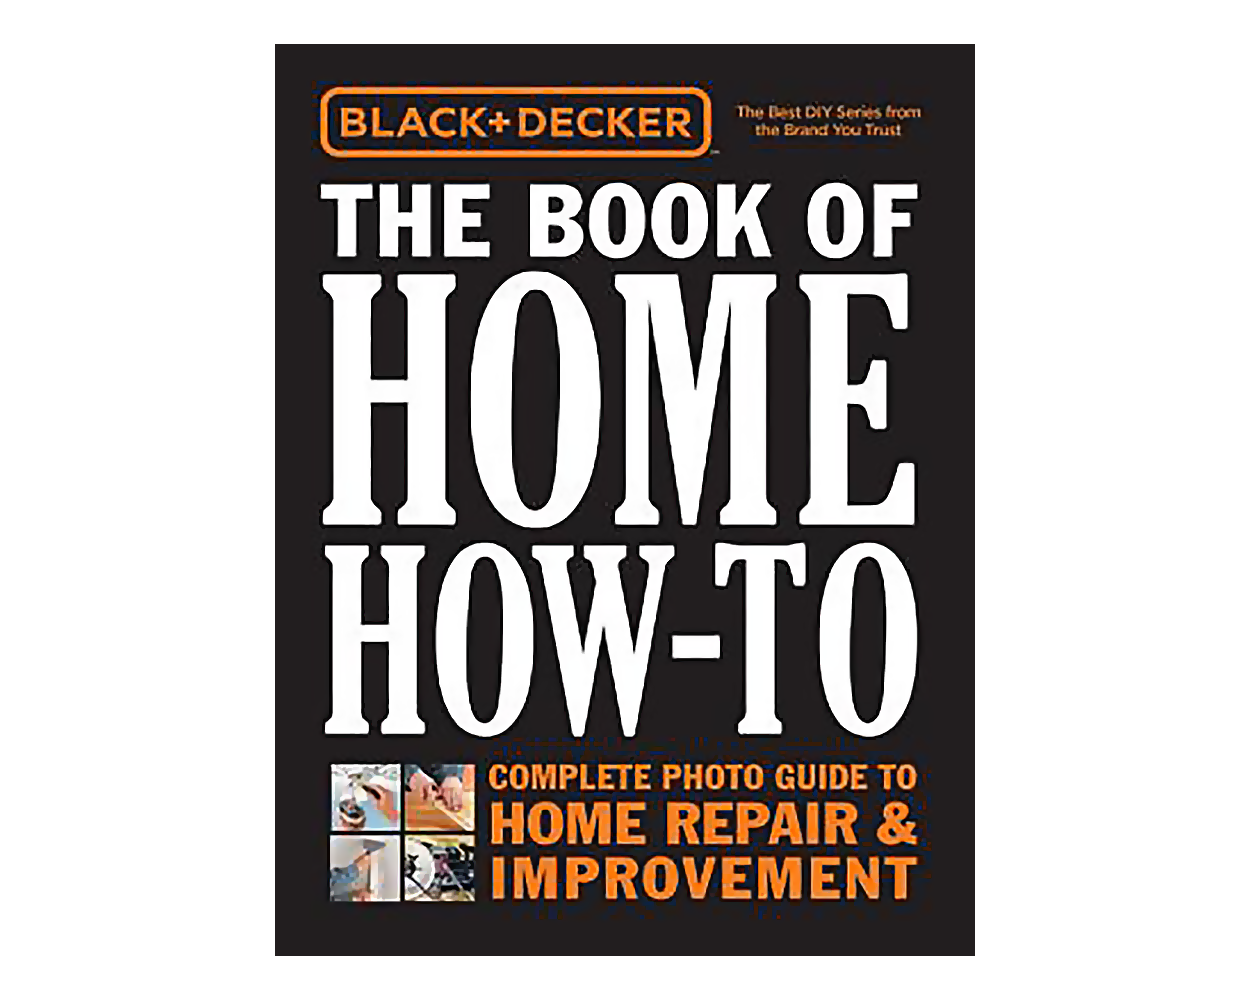 Black & Decker The Book of Home How-To Complete Photo Guide to Home Repair:  Wiring * Plumbing * Floors * Walls * Windows & Doors